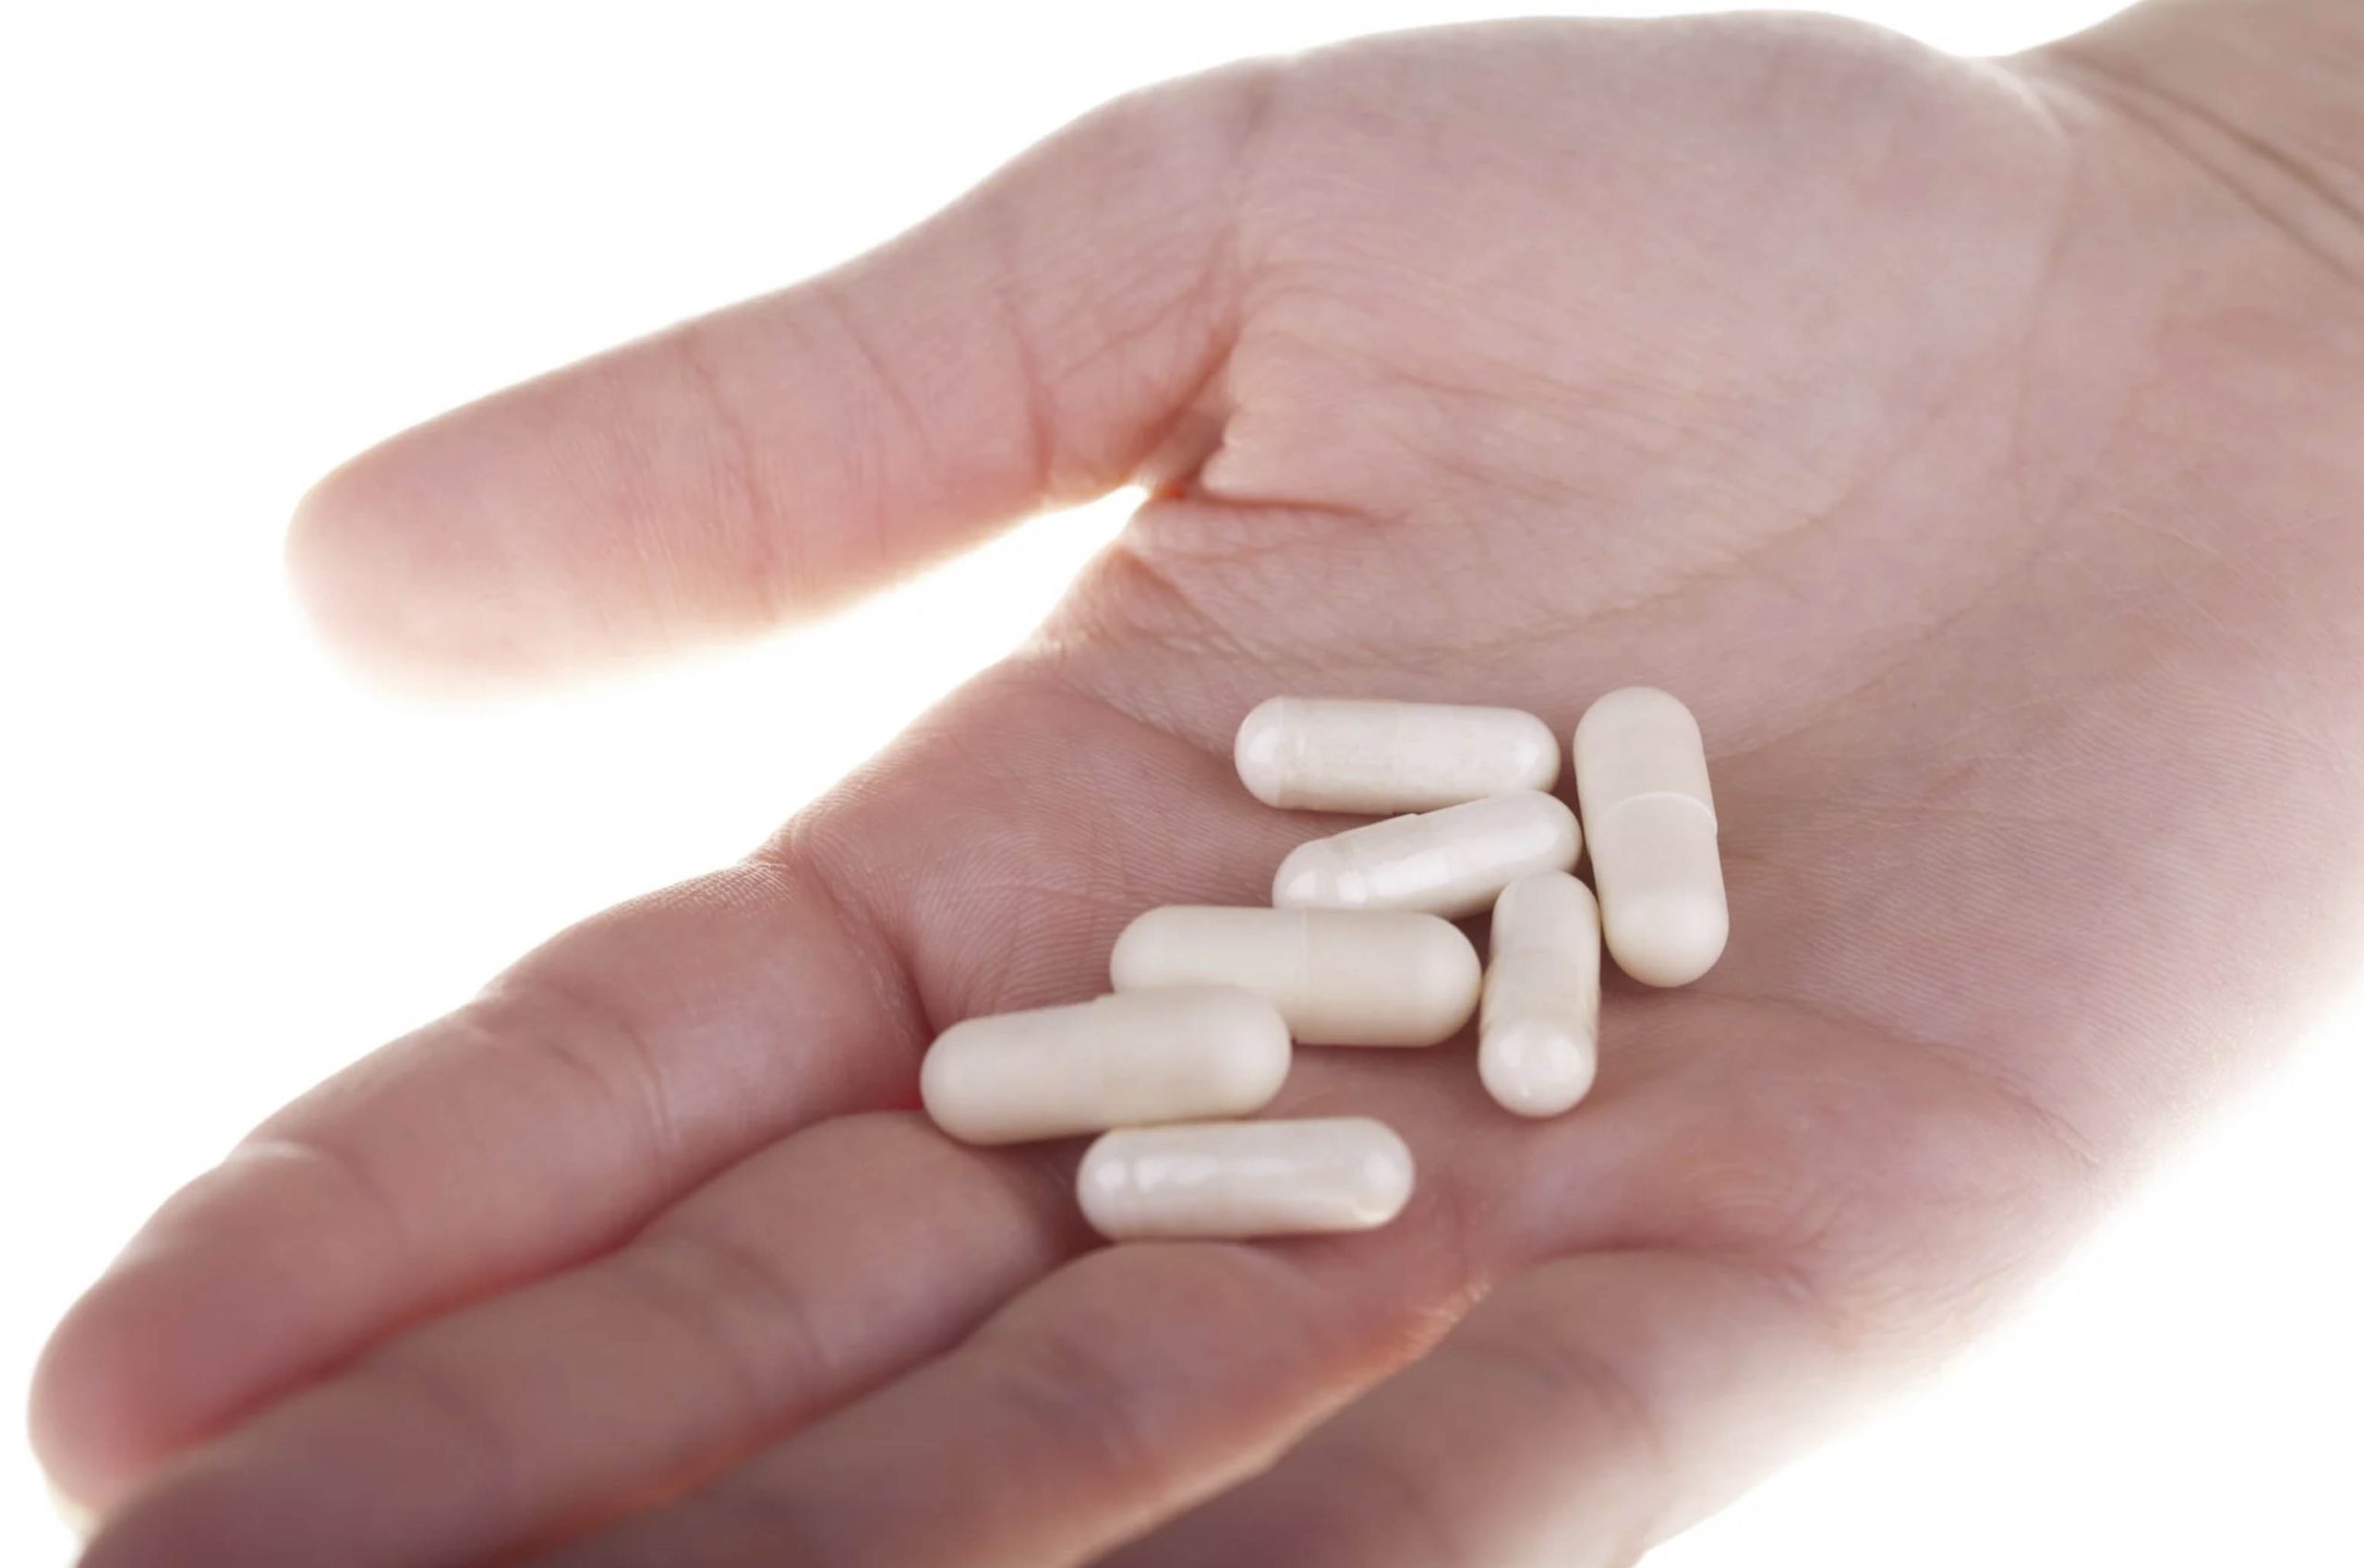 ACGrace - A person's hand holding several white pills.